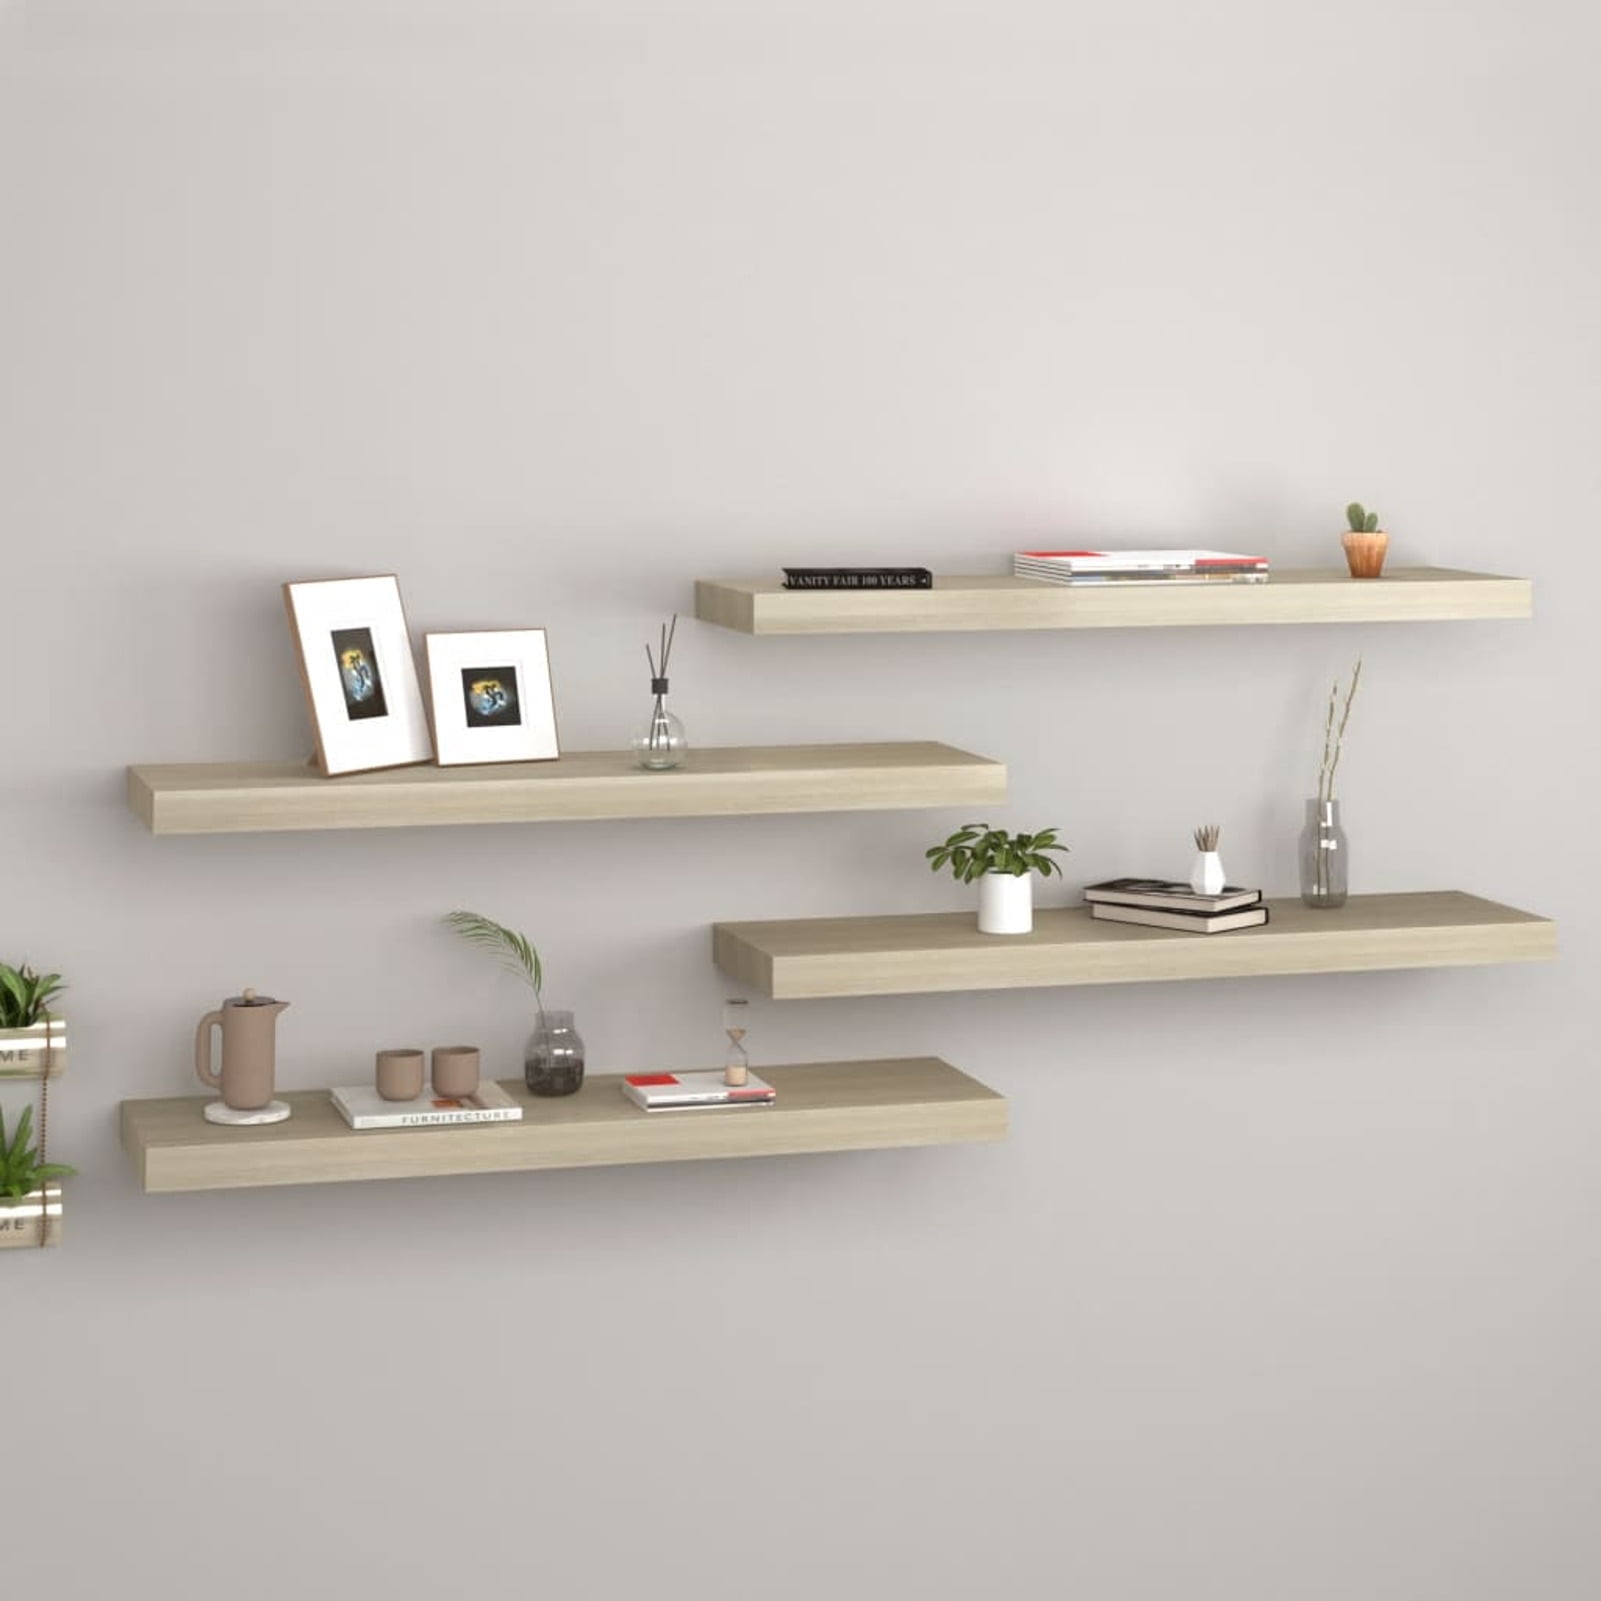 Details about   4PCS Wood Floating Wall Shelves Hanging Swing Rope Shelves for Bedrooms Brown 